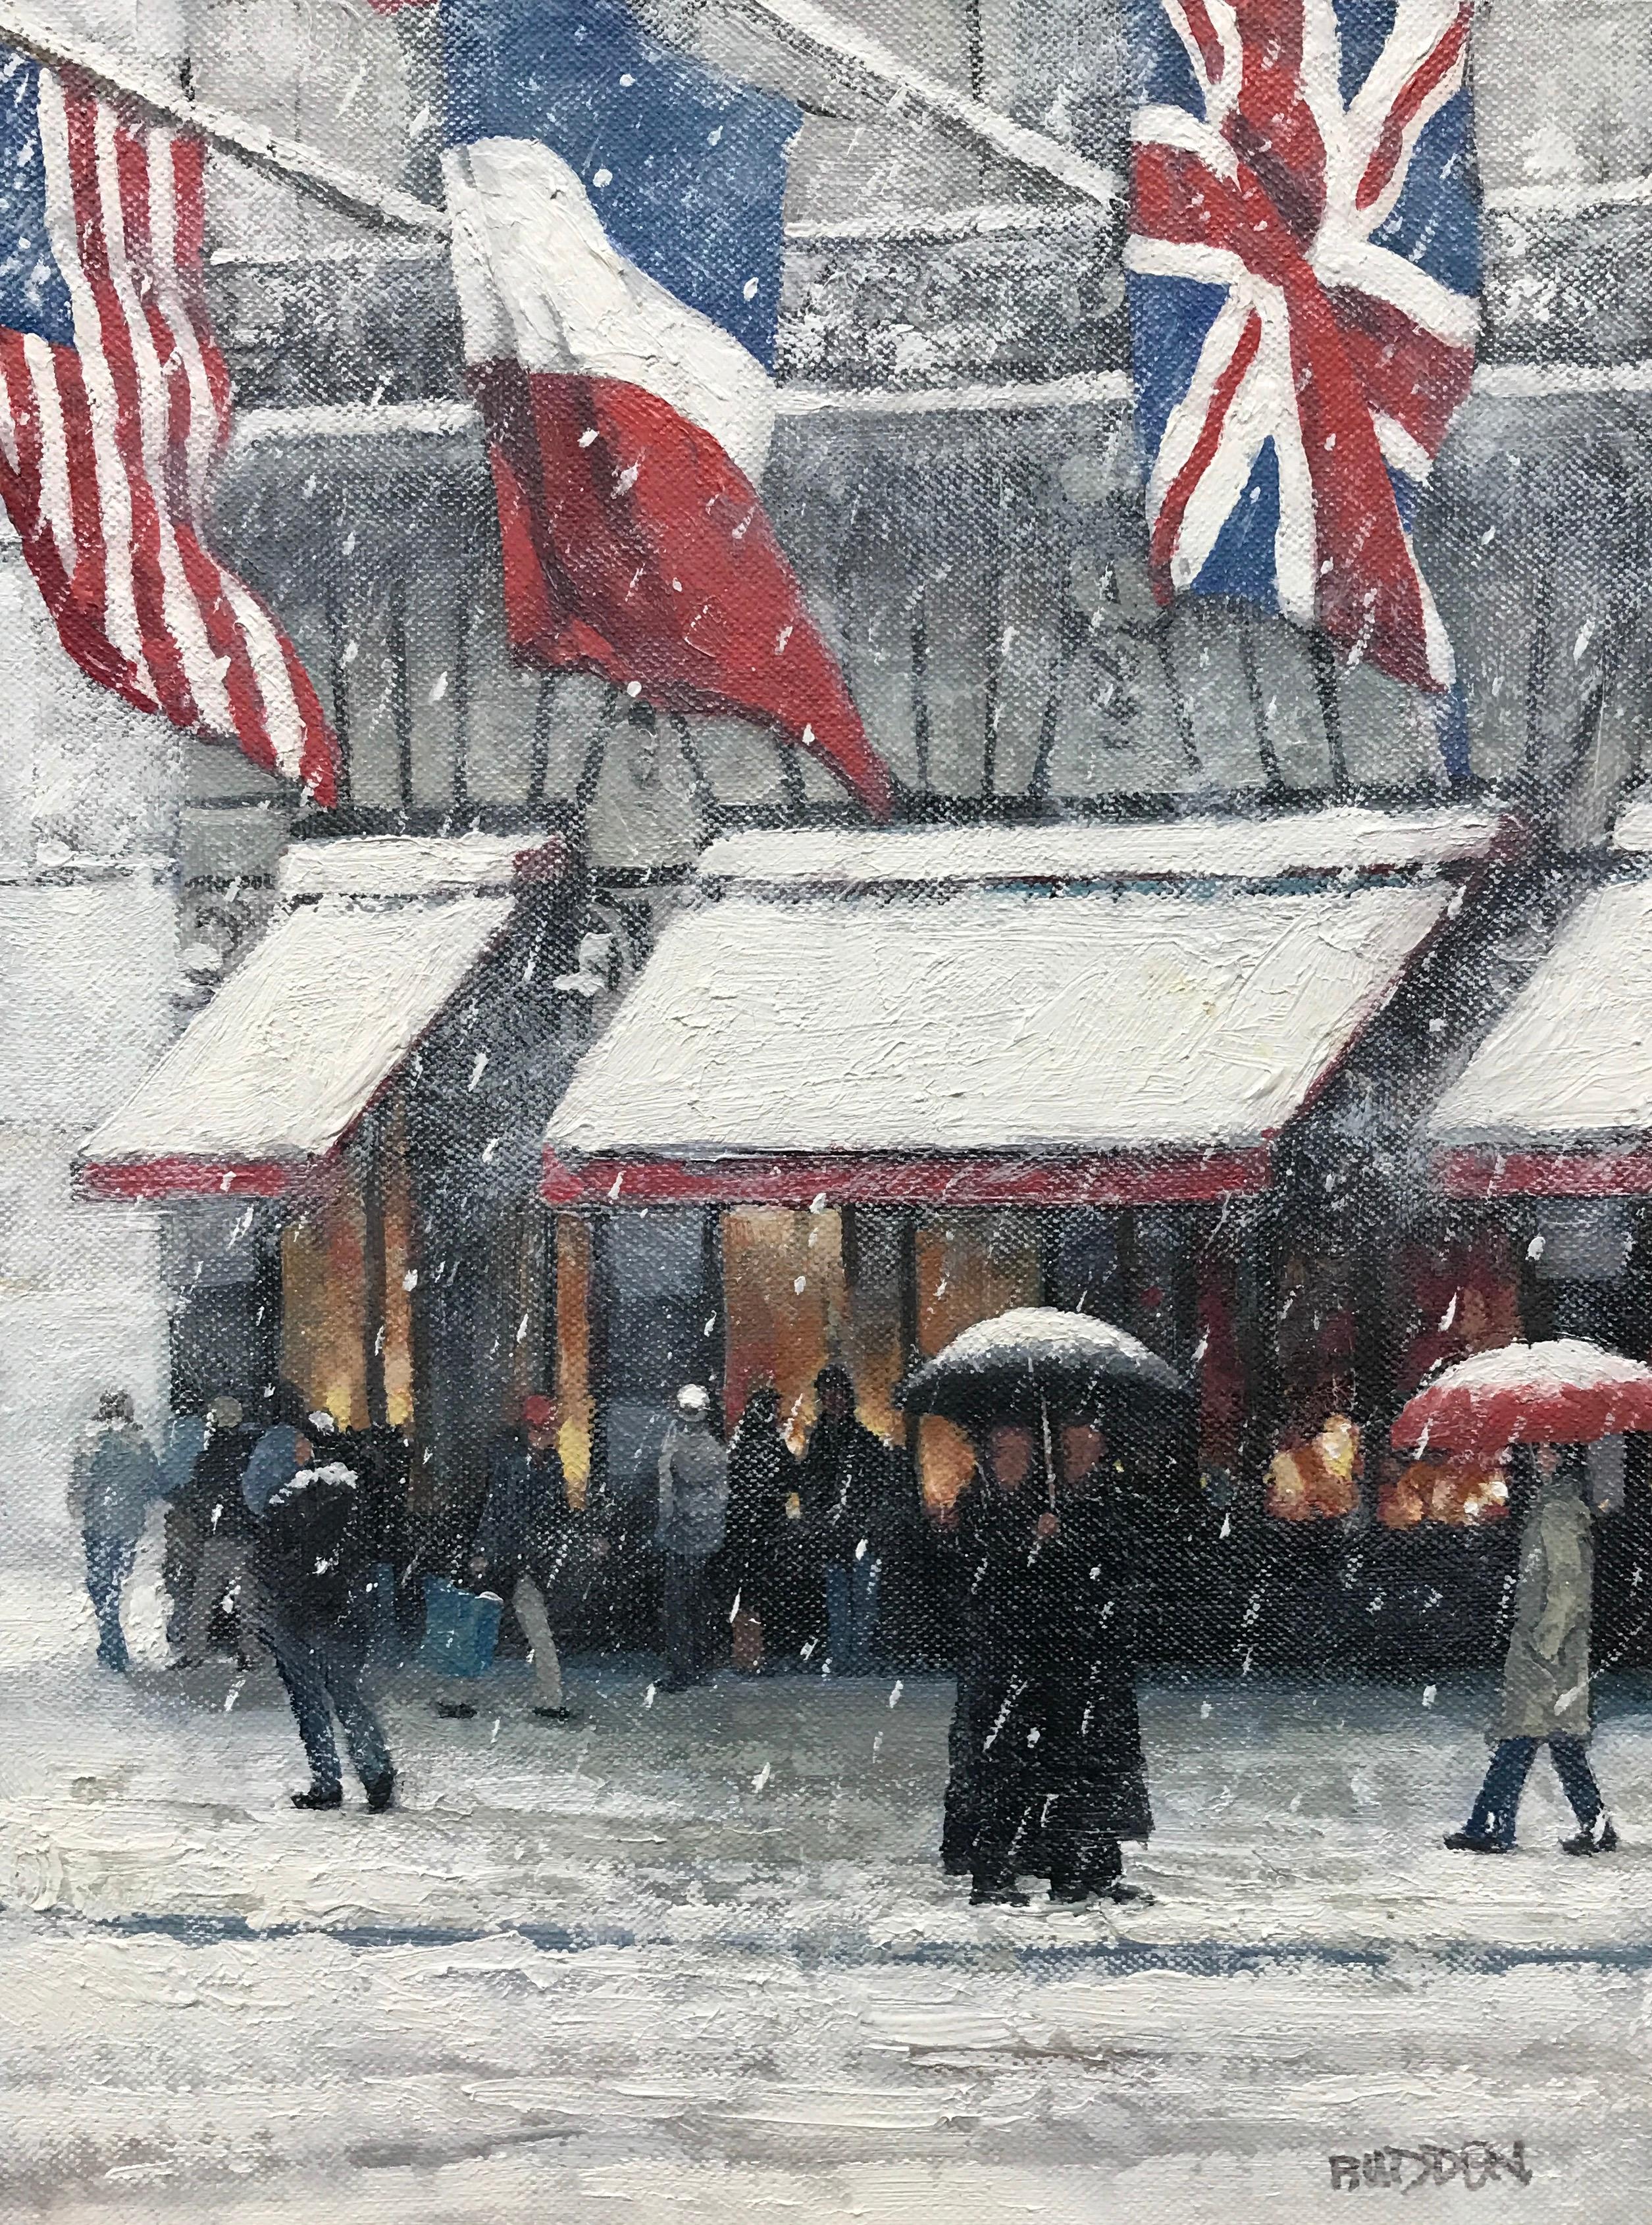 Winter At Cartier's, Iconic Flags, Contemporary Oil Painting of New York City - Black Landscape Painting by Michael Budden